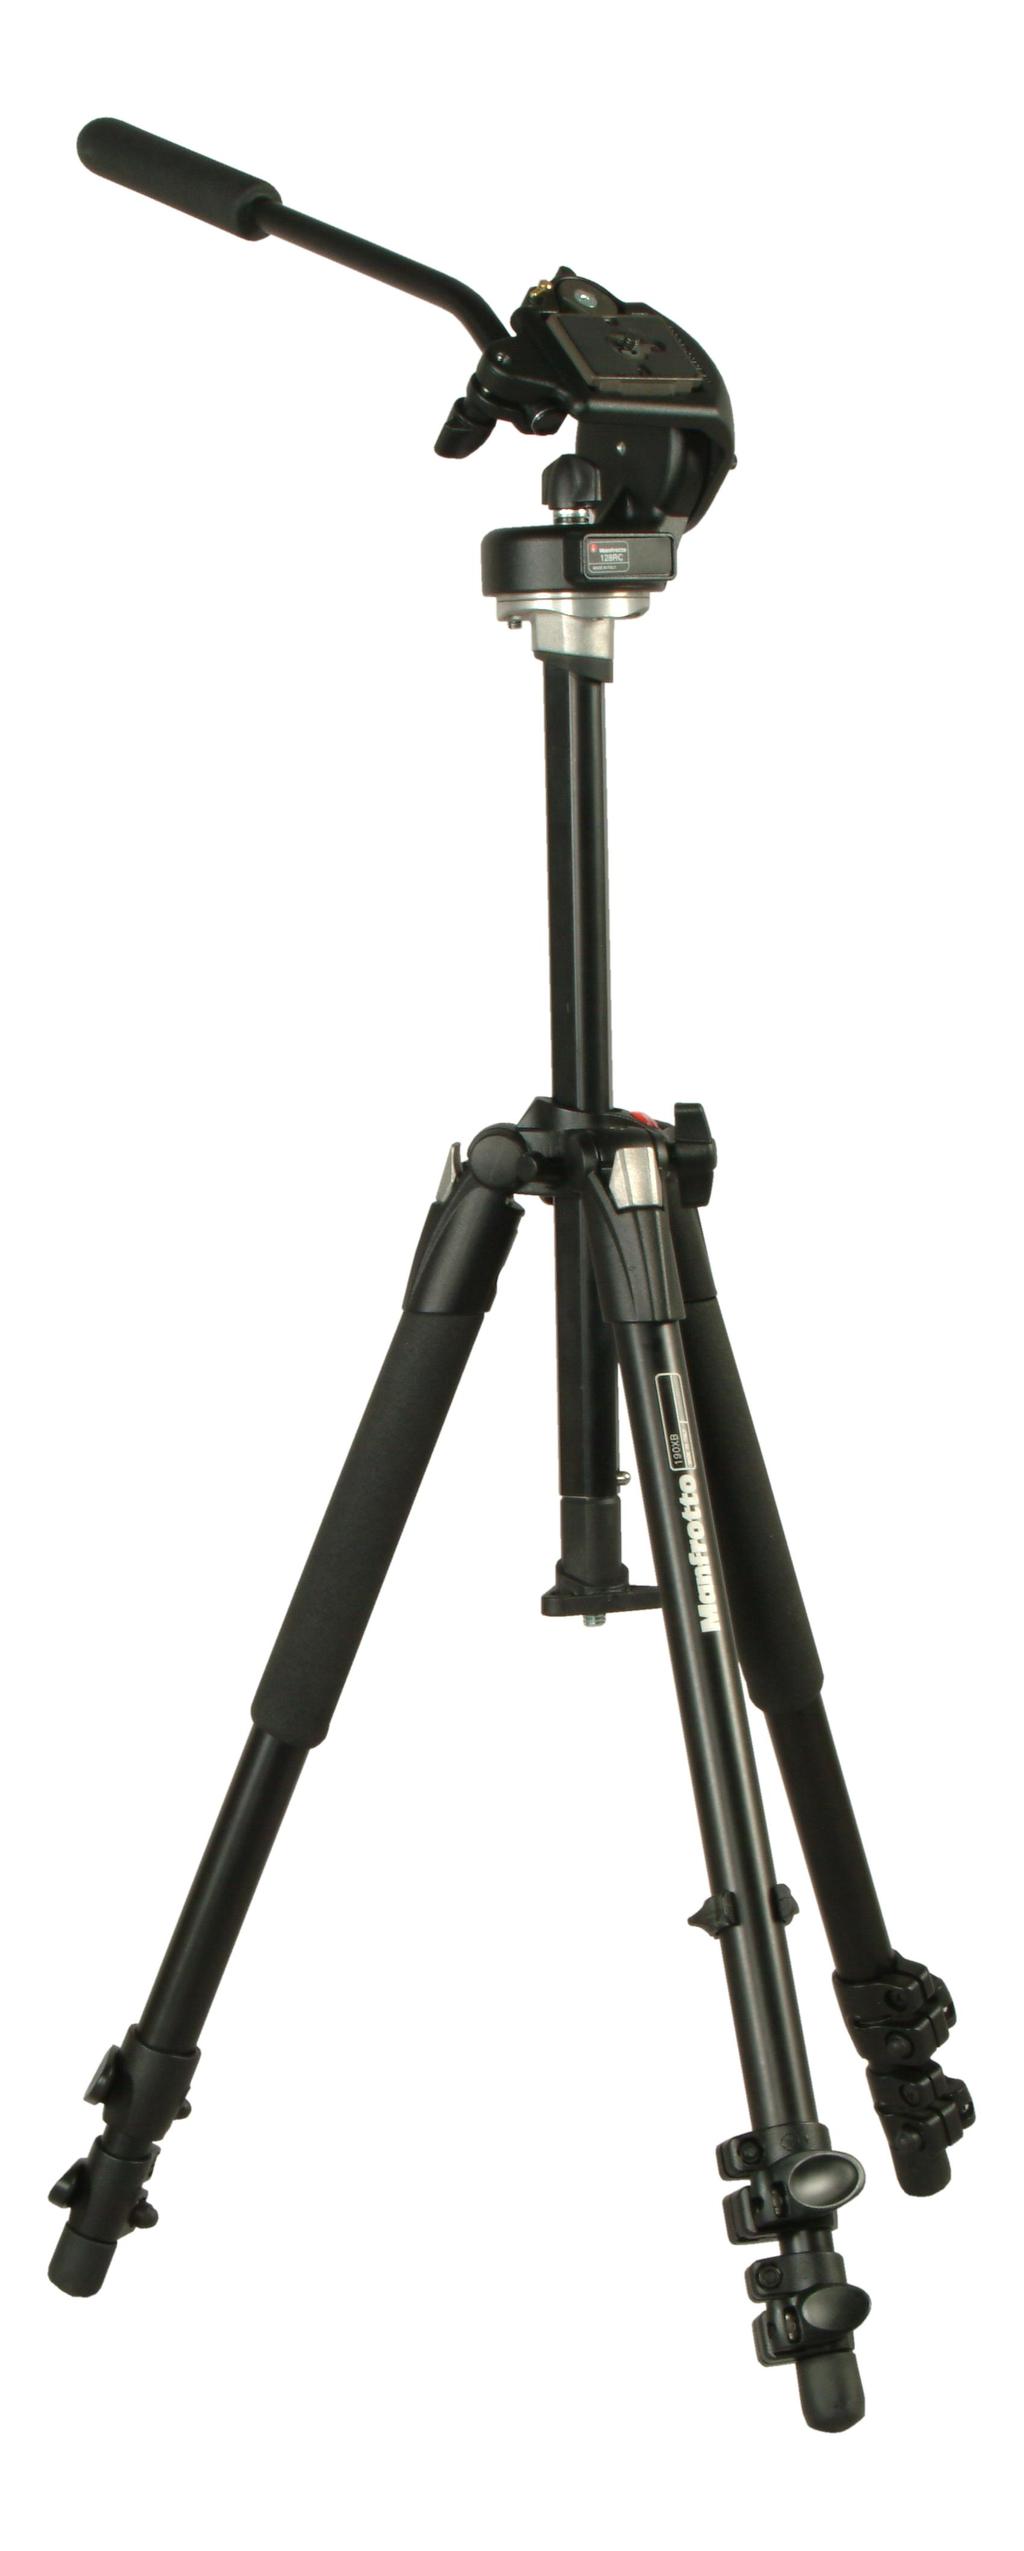 Heavy-Duty Tripod (Optional) 583216 (40208-10) The Heavy-Duty Tripod is a compact, heavy-duty unit that is perfectly suited to hold the Solar Panel, Model 8806, when performing outdoor exercises.